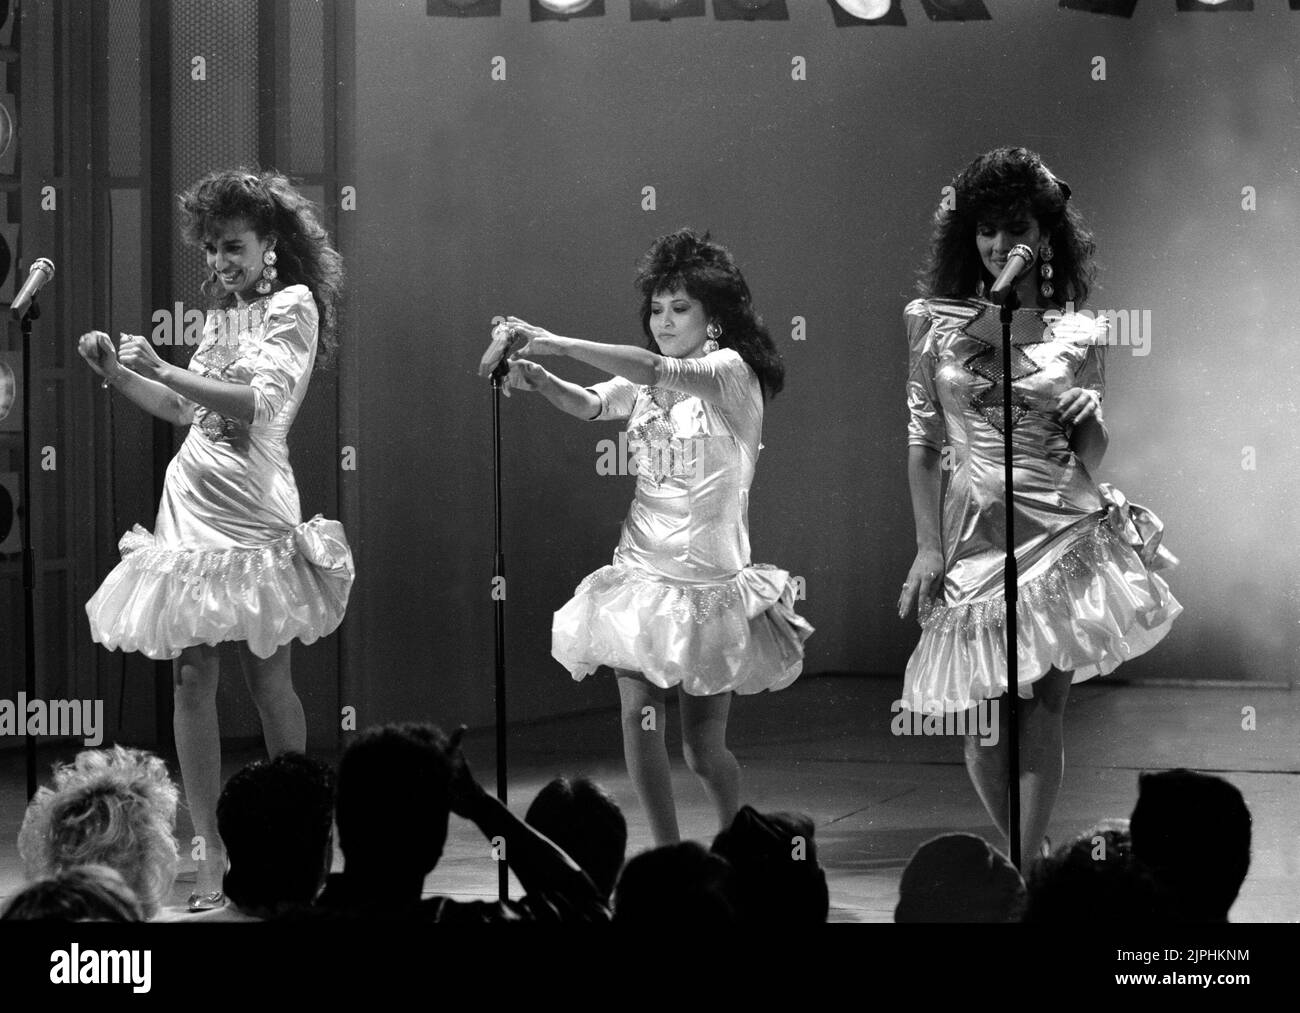 The Cover Girls on American Bandstand 1985 Credit: Ron Wolfson / MediaPunch Stockfoto